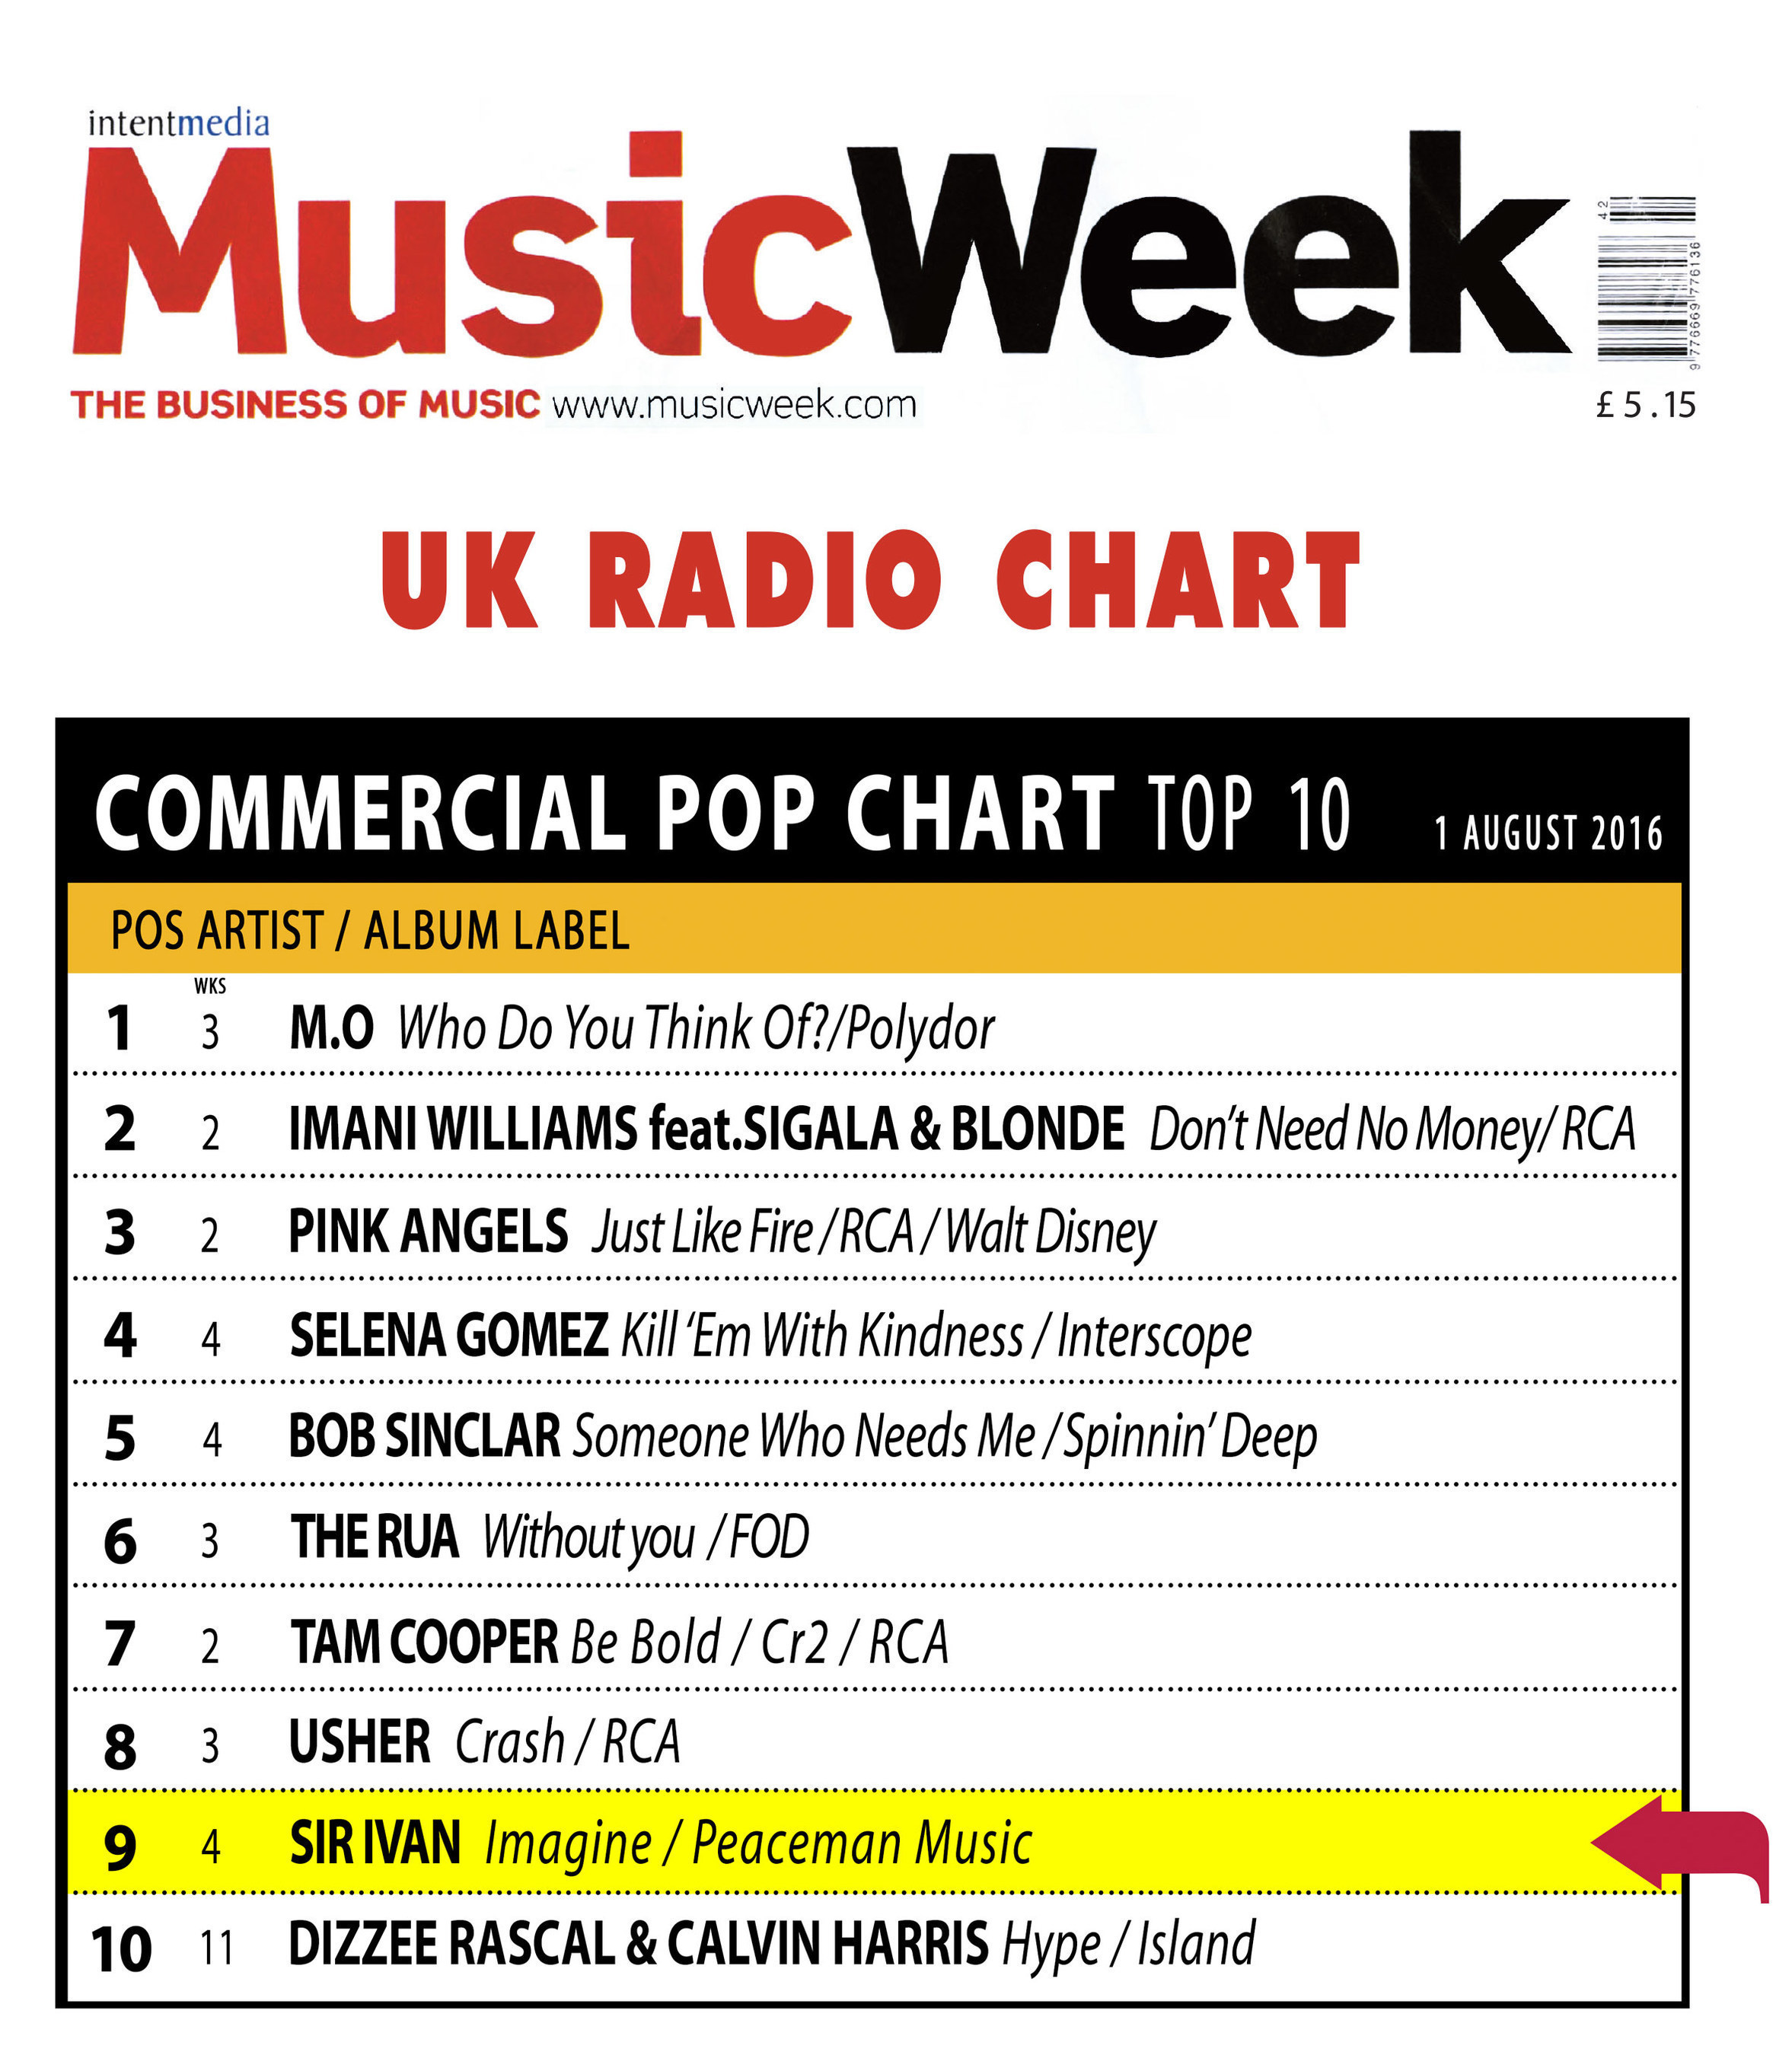 SIR IVAN's "Imagine" #9 on Music Week's Commericial Pop Chart